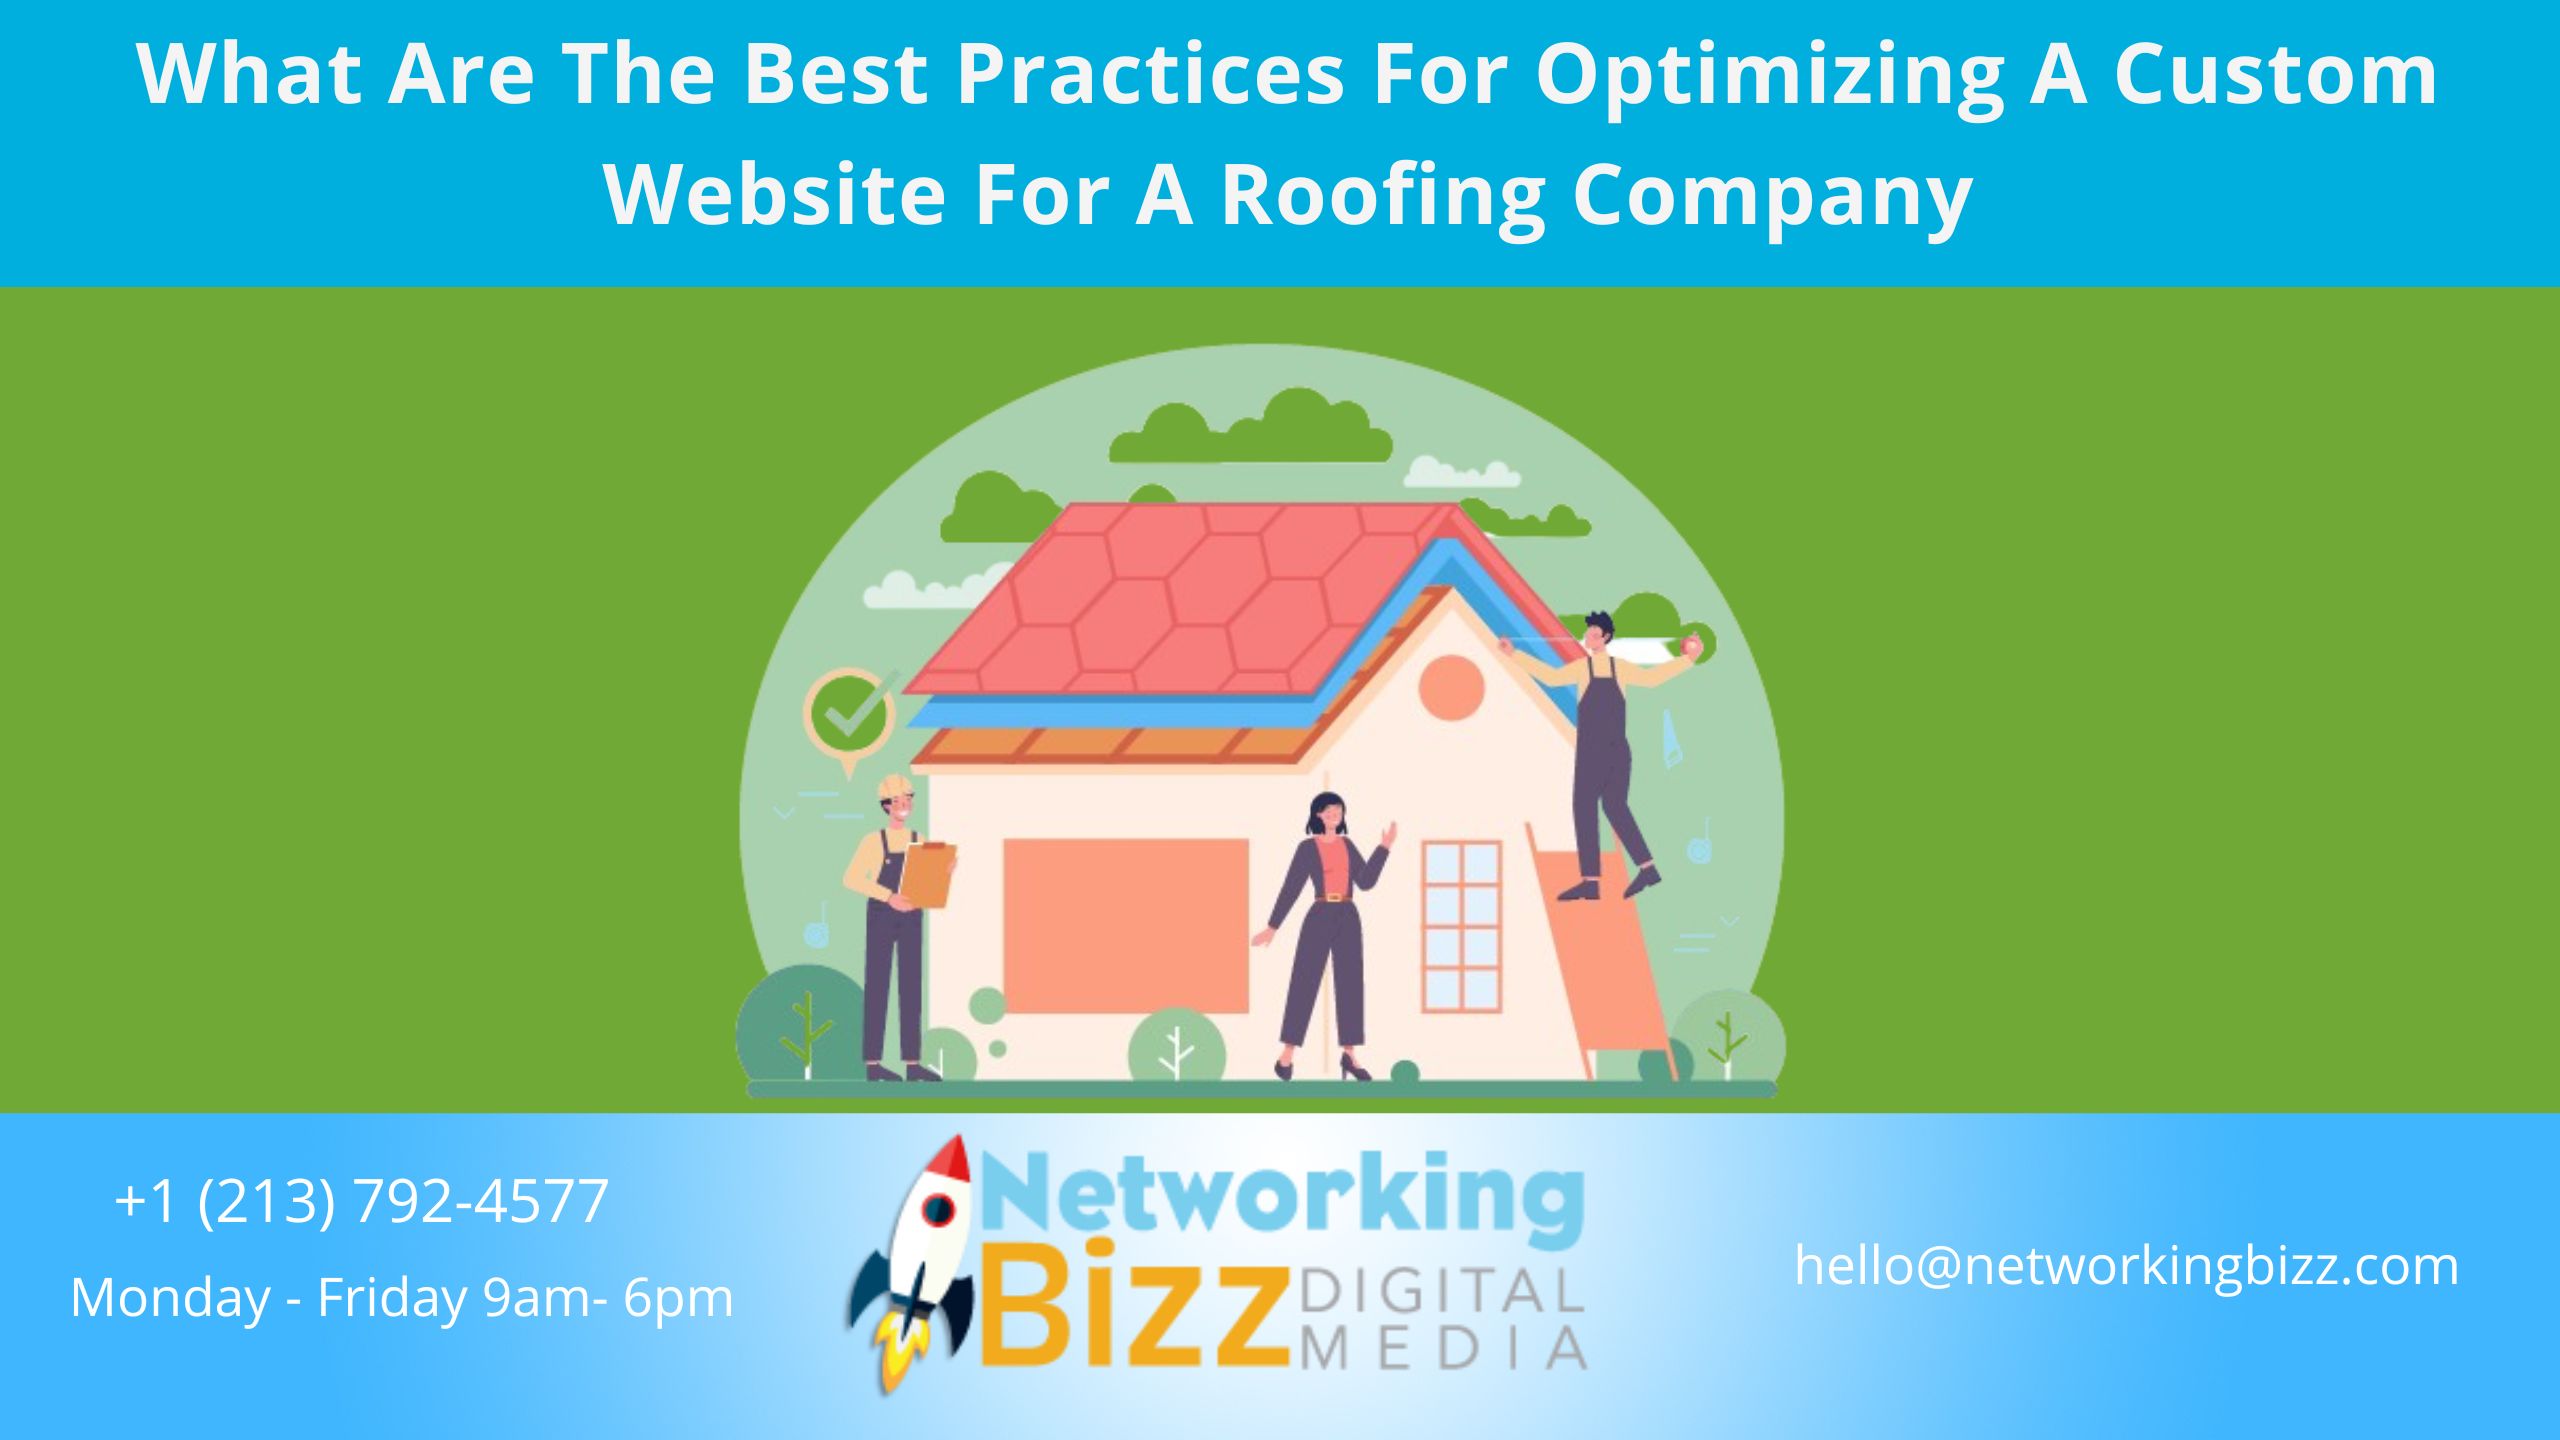 What Are The Best Practices For Optimizing A Custom Website For A Roofing Company